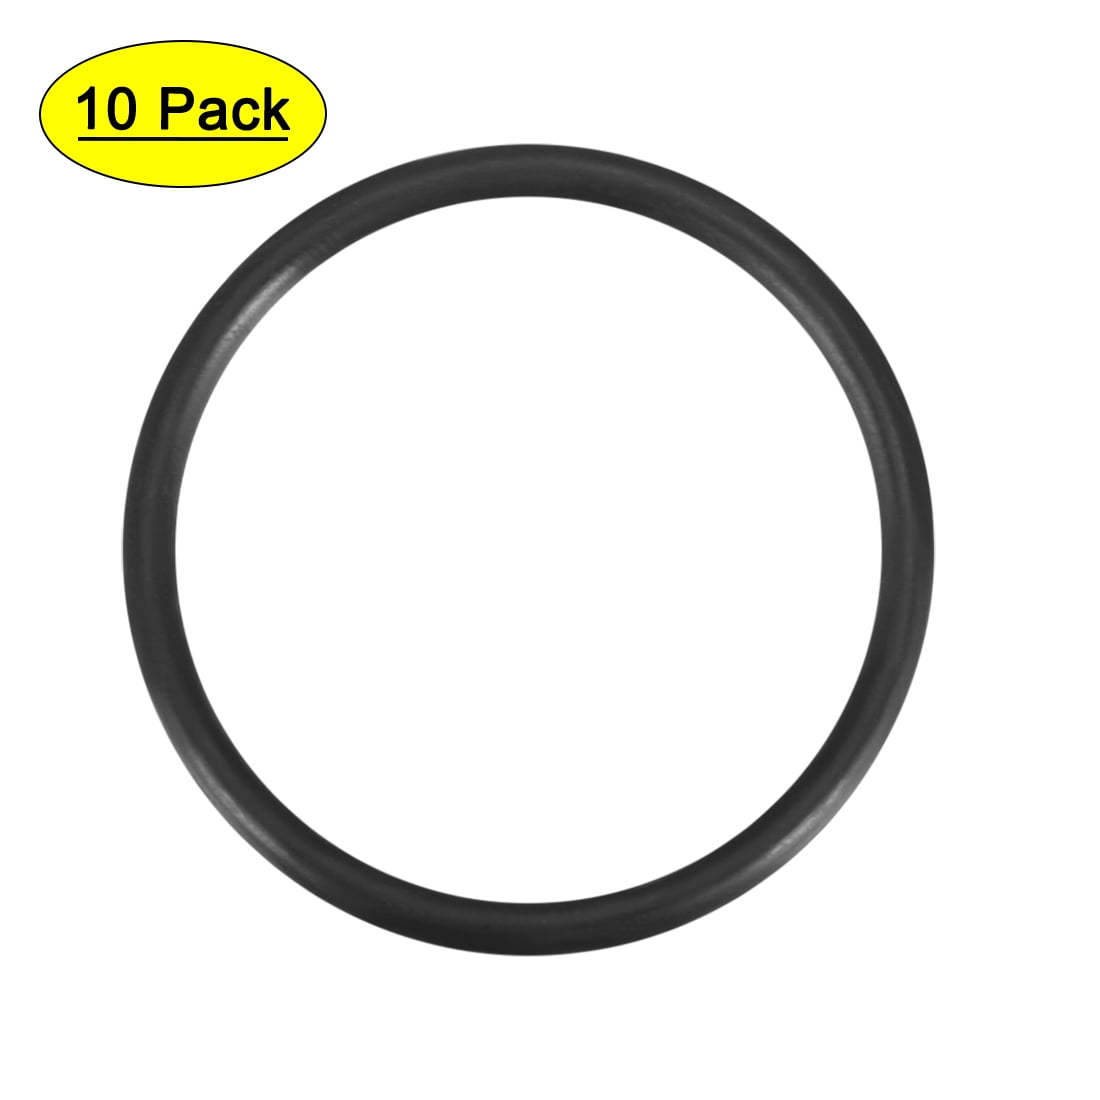 Oil Seal Size 25mm X 32mm X 4mm 10 Pack 